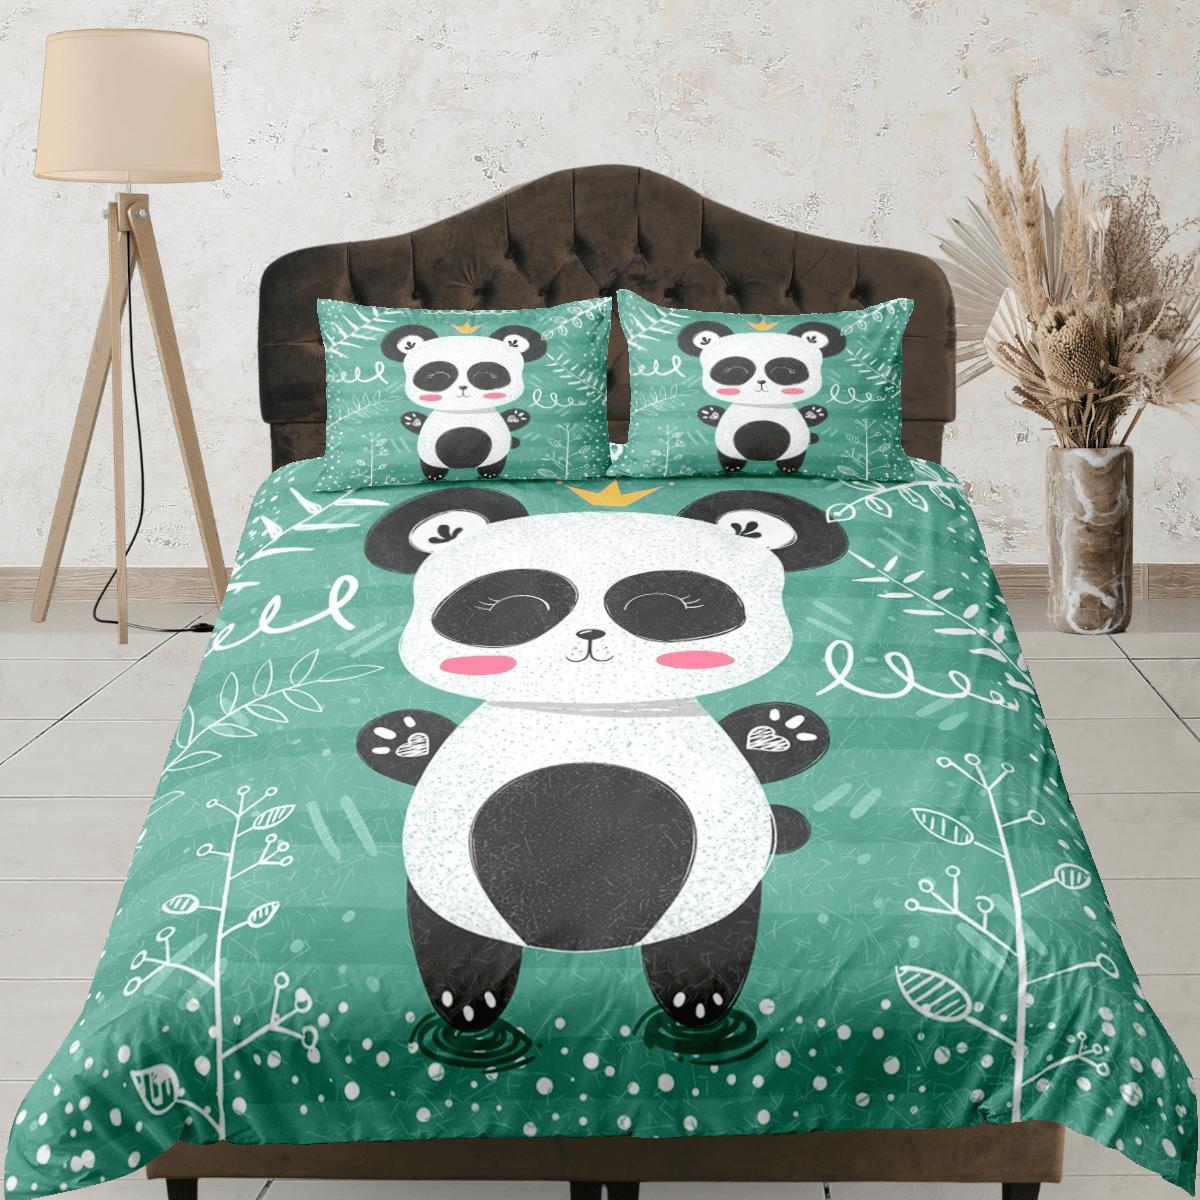 daintyduvet Cute Happy Panda Duvet Cover Set Colorful Bedspread, Kids Bedding with Pillowcase